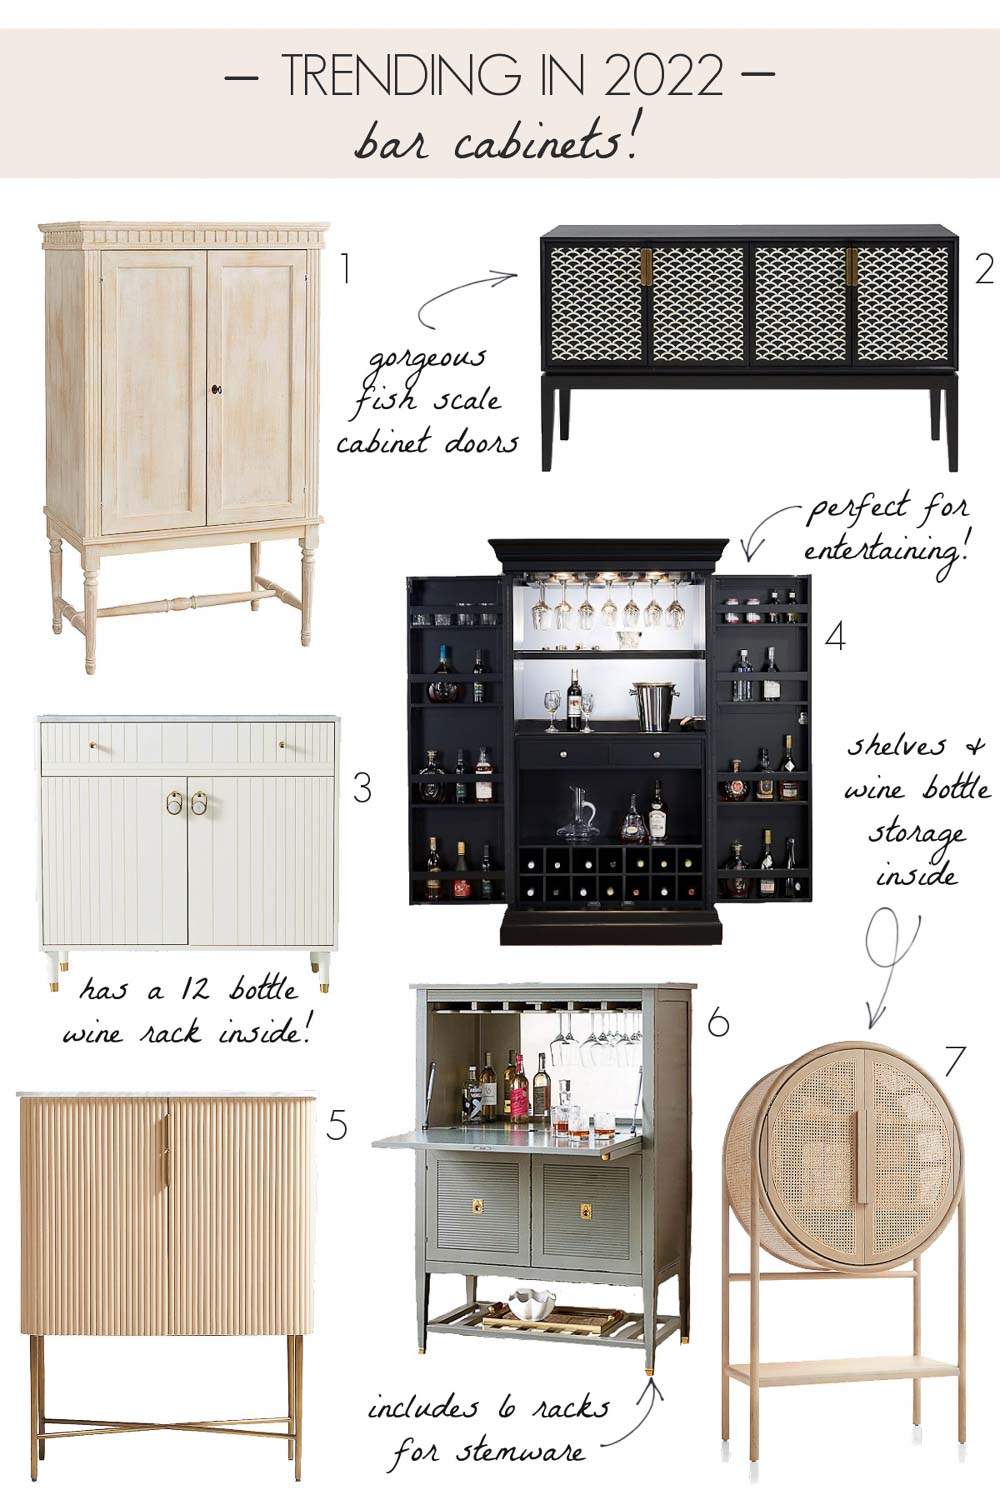 Luxe bar cabinets are trending for 2022!